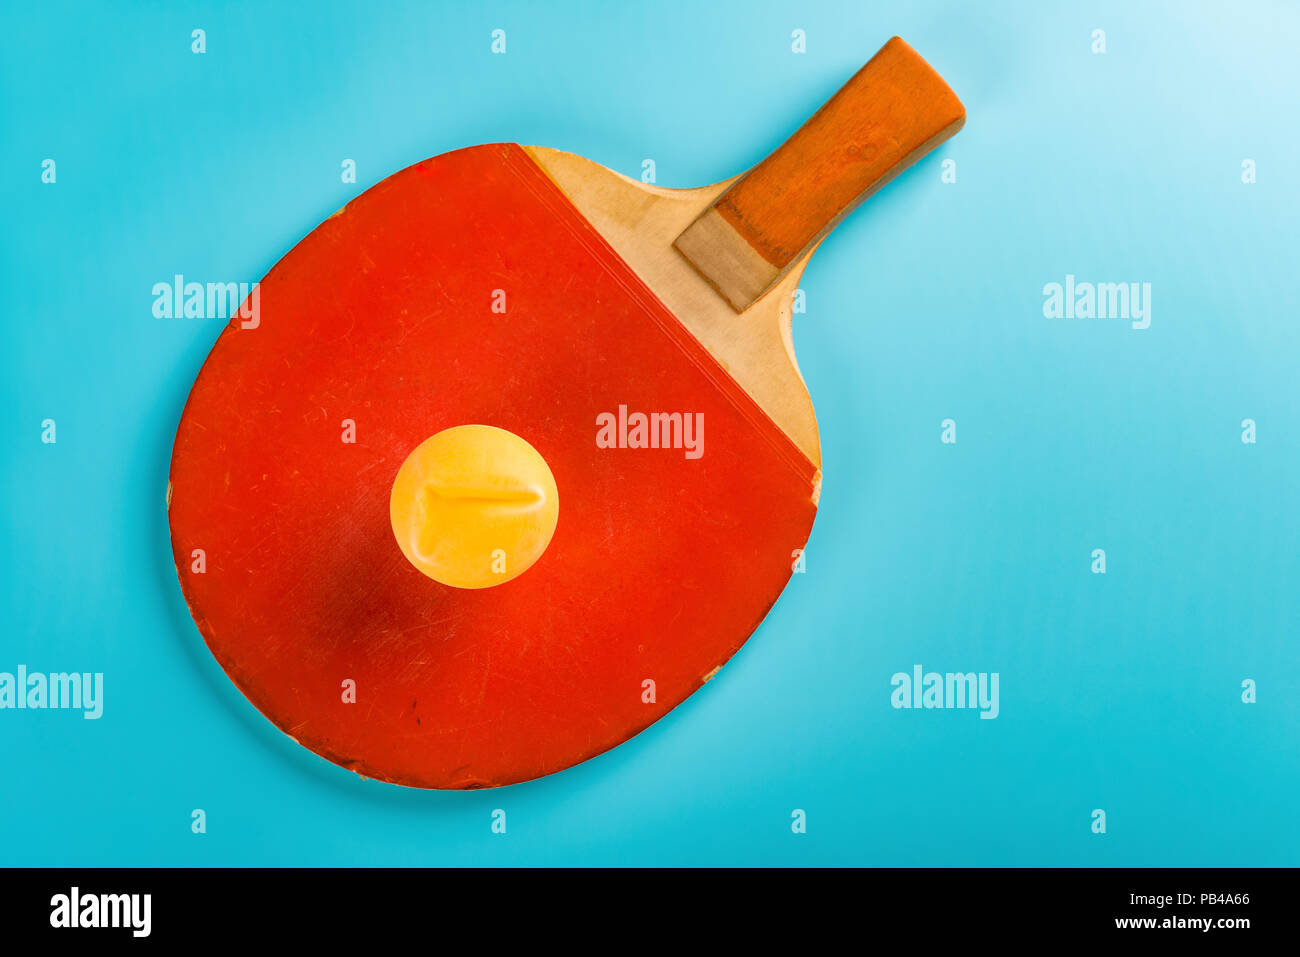 pingpong racket and a ball on blue background Stock Photo